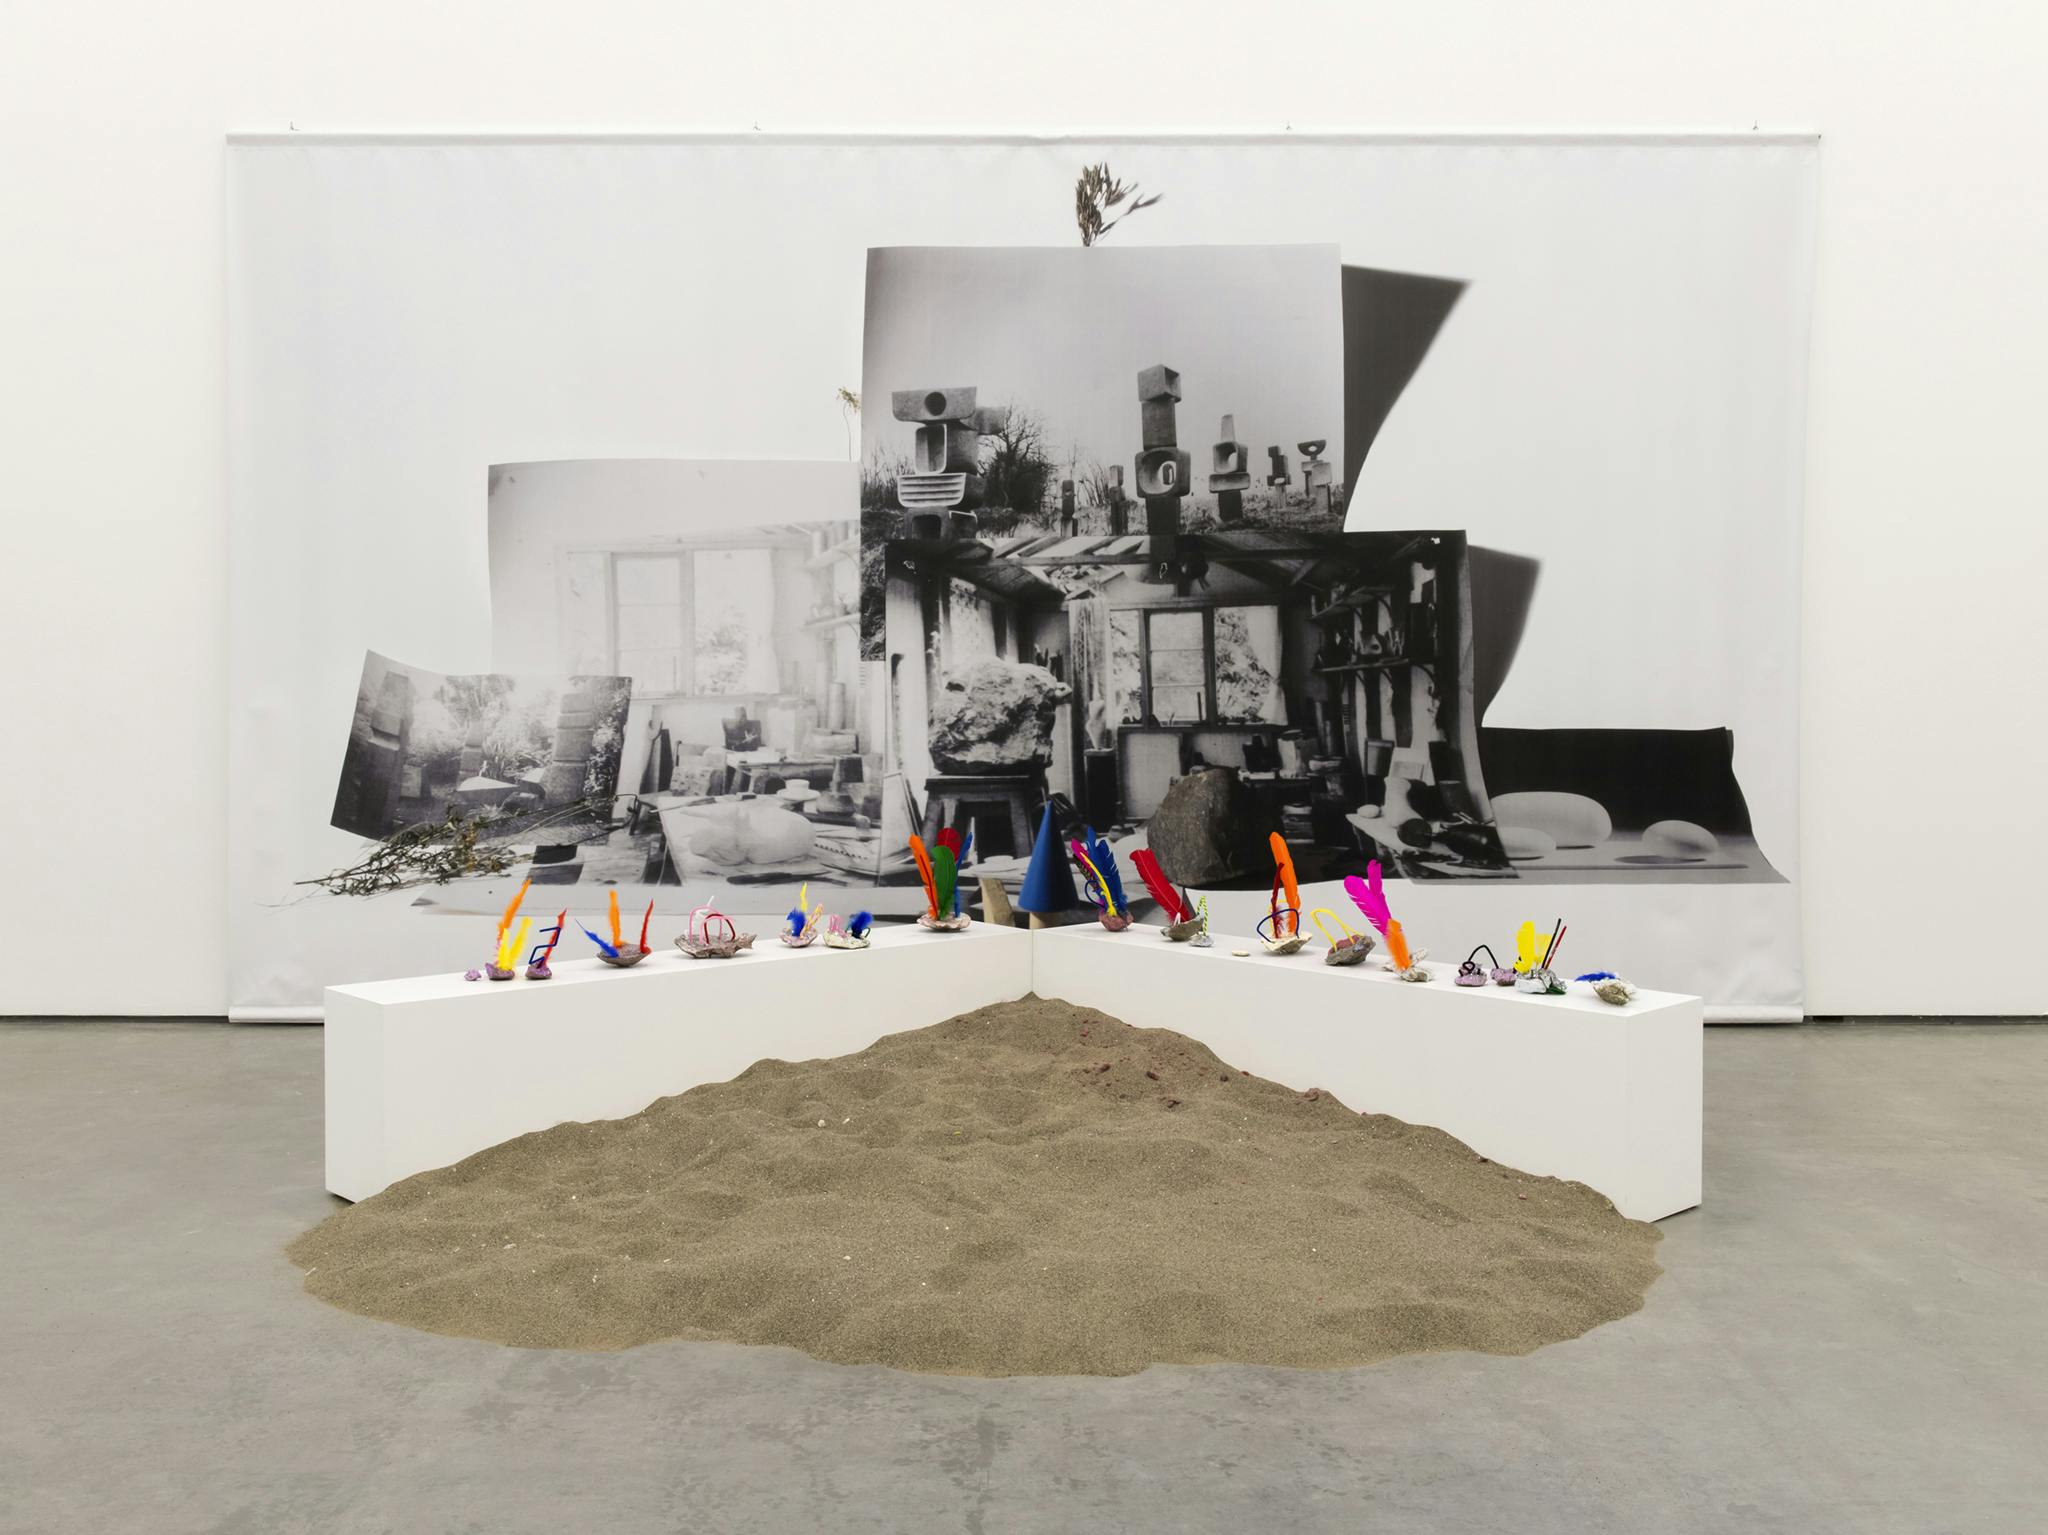 Sand is piled against a V-shaped plinth on a gallery floor. Lining the top of the plinth are small colourful sculptures. Behind a large black & white vinyl print of a photo collage hangs on the wall. 